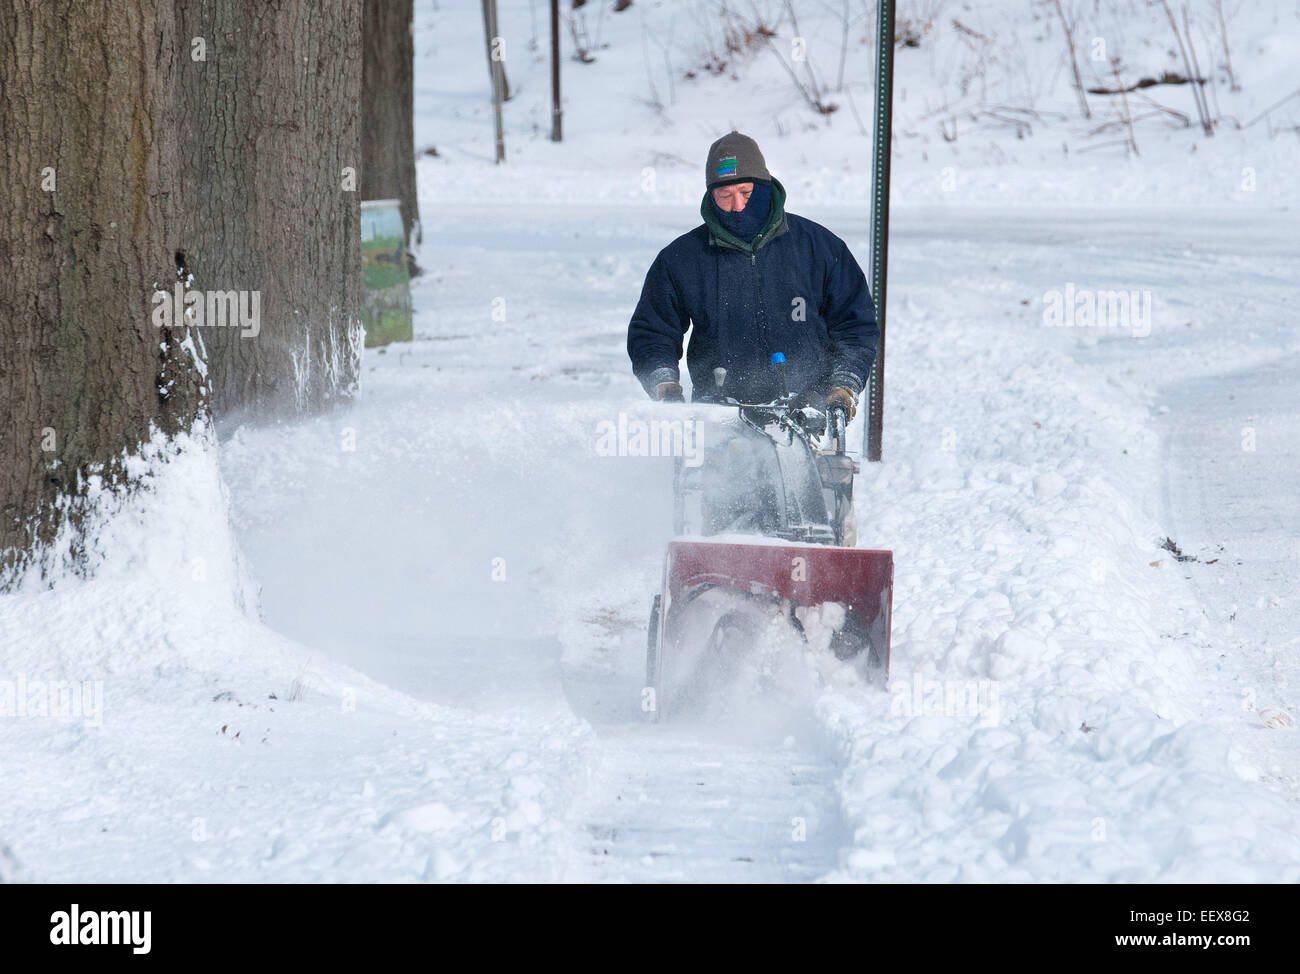 Daniel Barvir 'Ranger Dan' uses a snowblower on Mitchell Drive in New Haven near East Rock Park. Barvir was helping out the New Haven public works crews, saying they are really busy and 'we all need to pull together.' Stock Photo